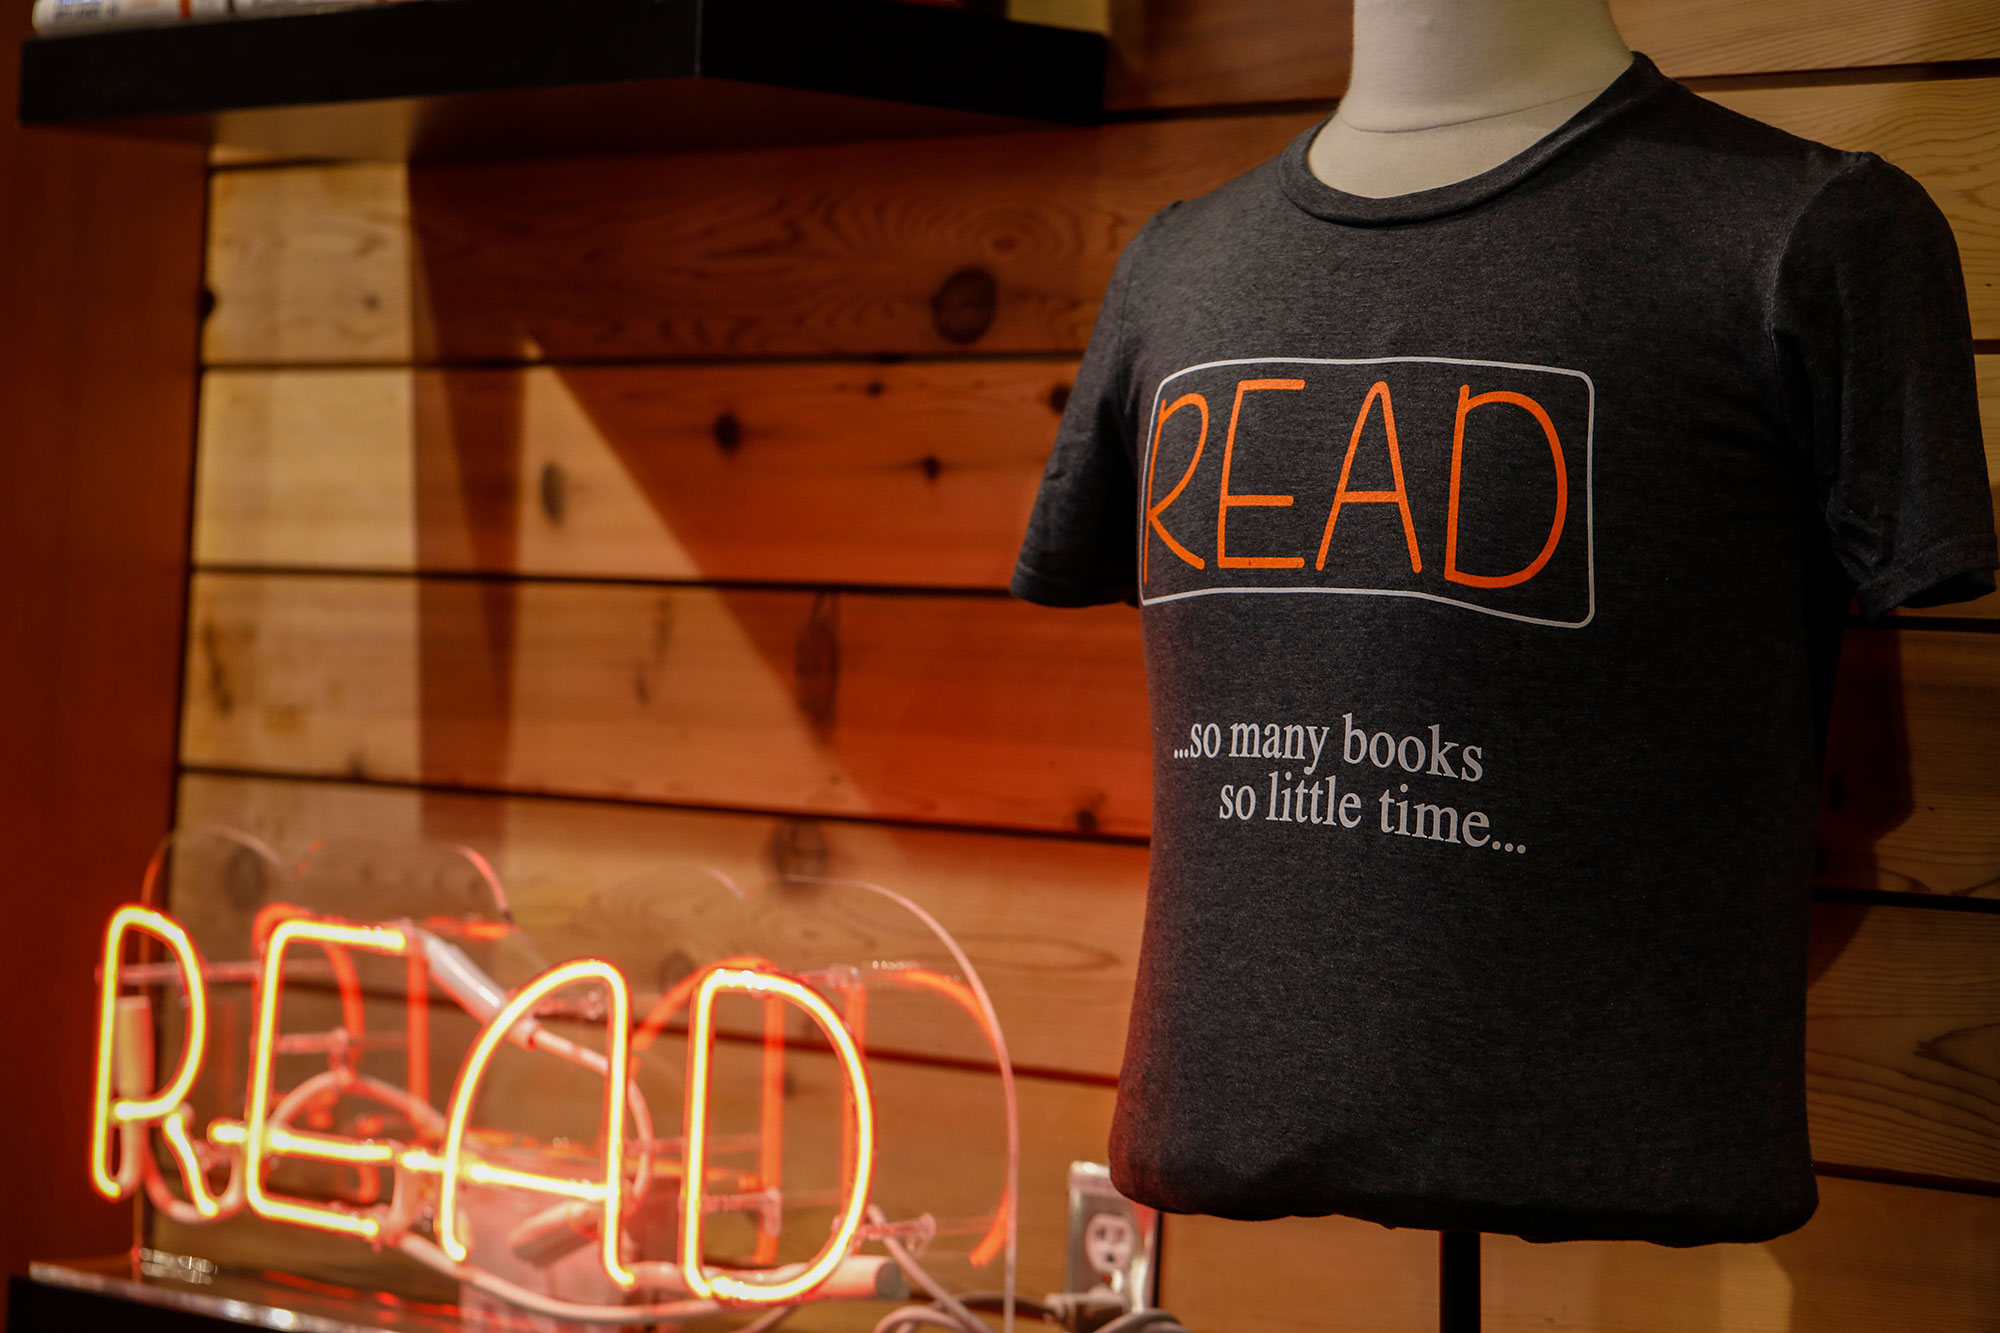 SEA Elliot Bay Book Company T-shirt and Neon Read Sign